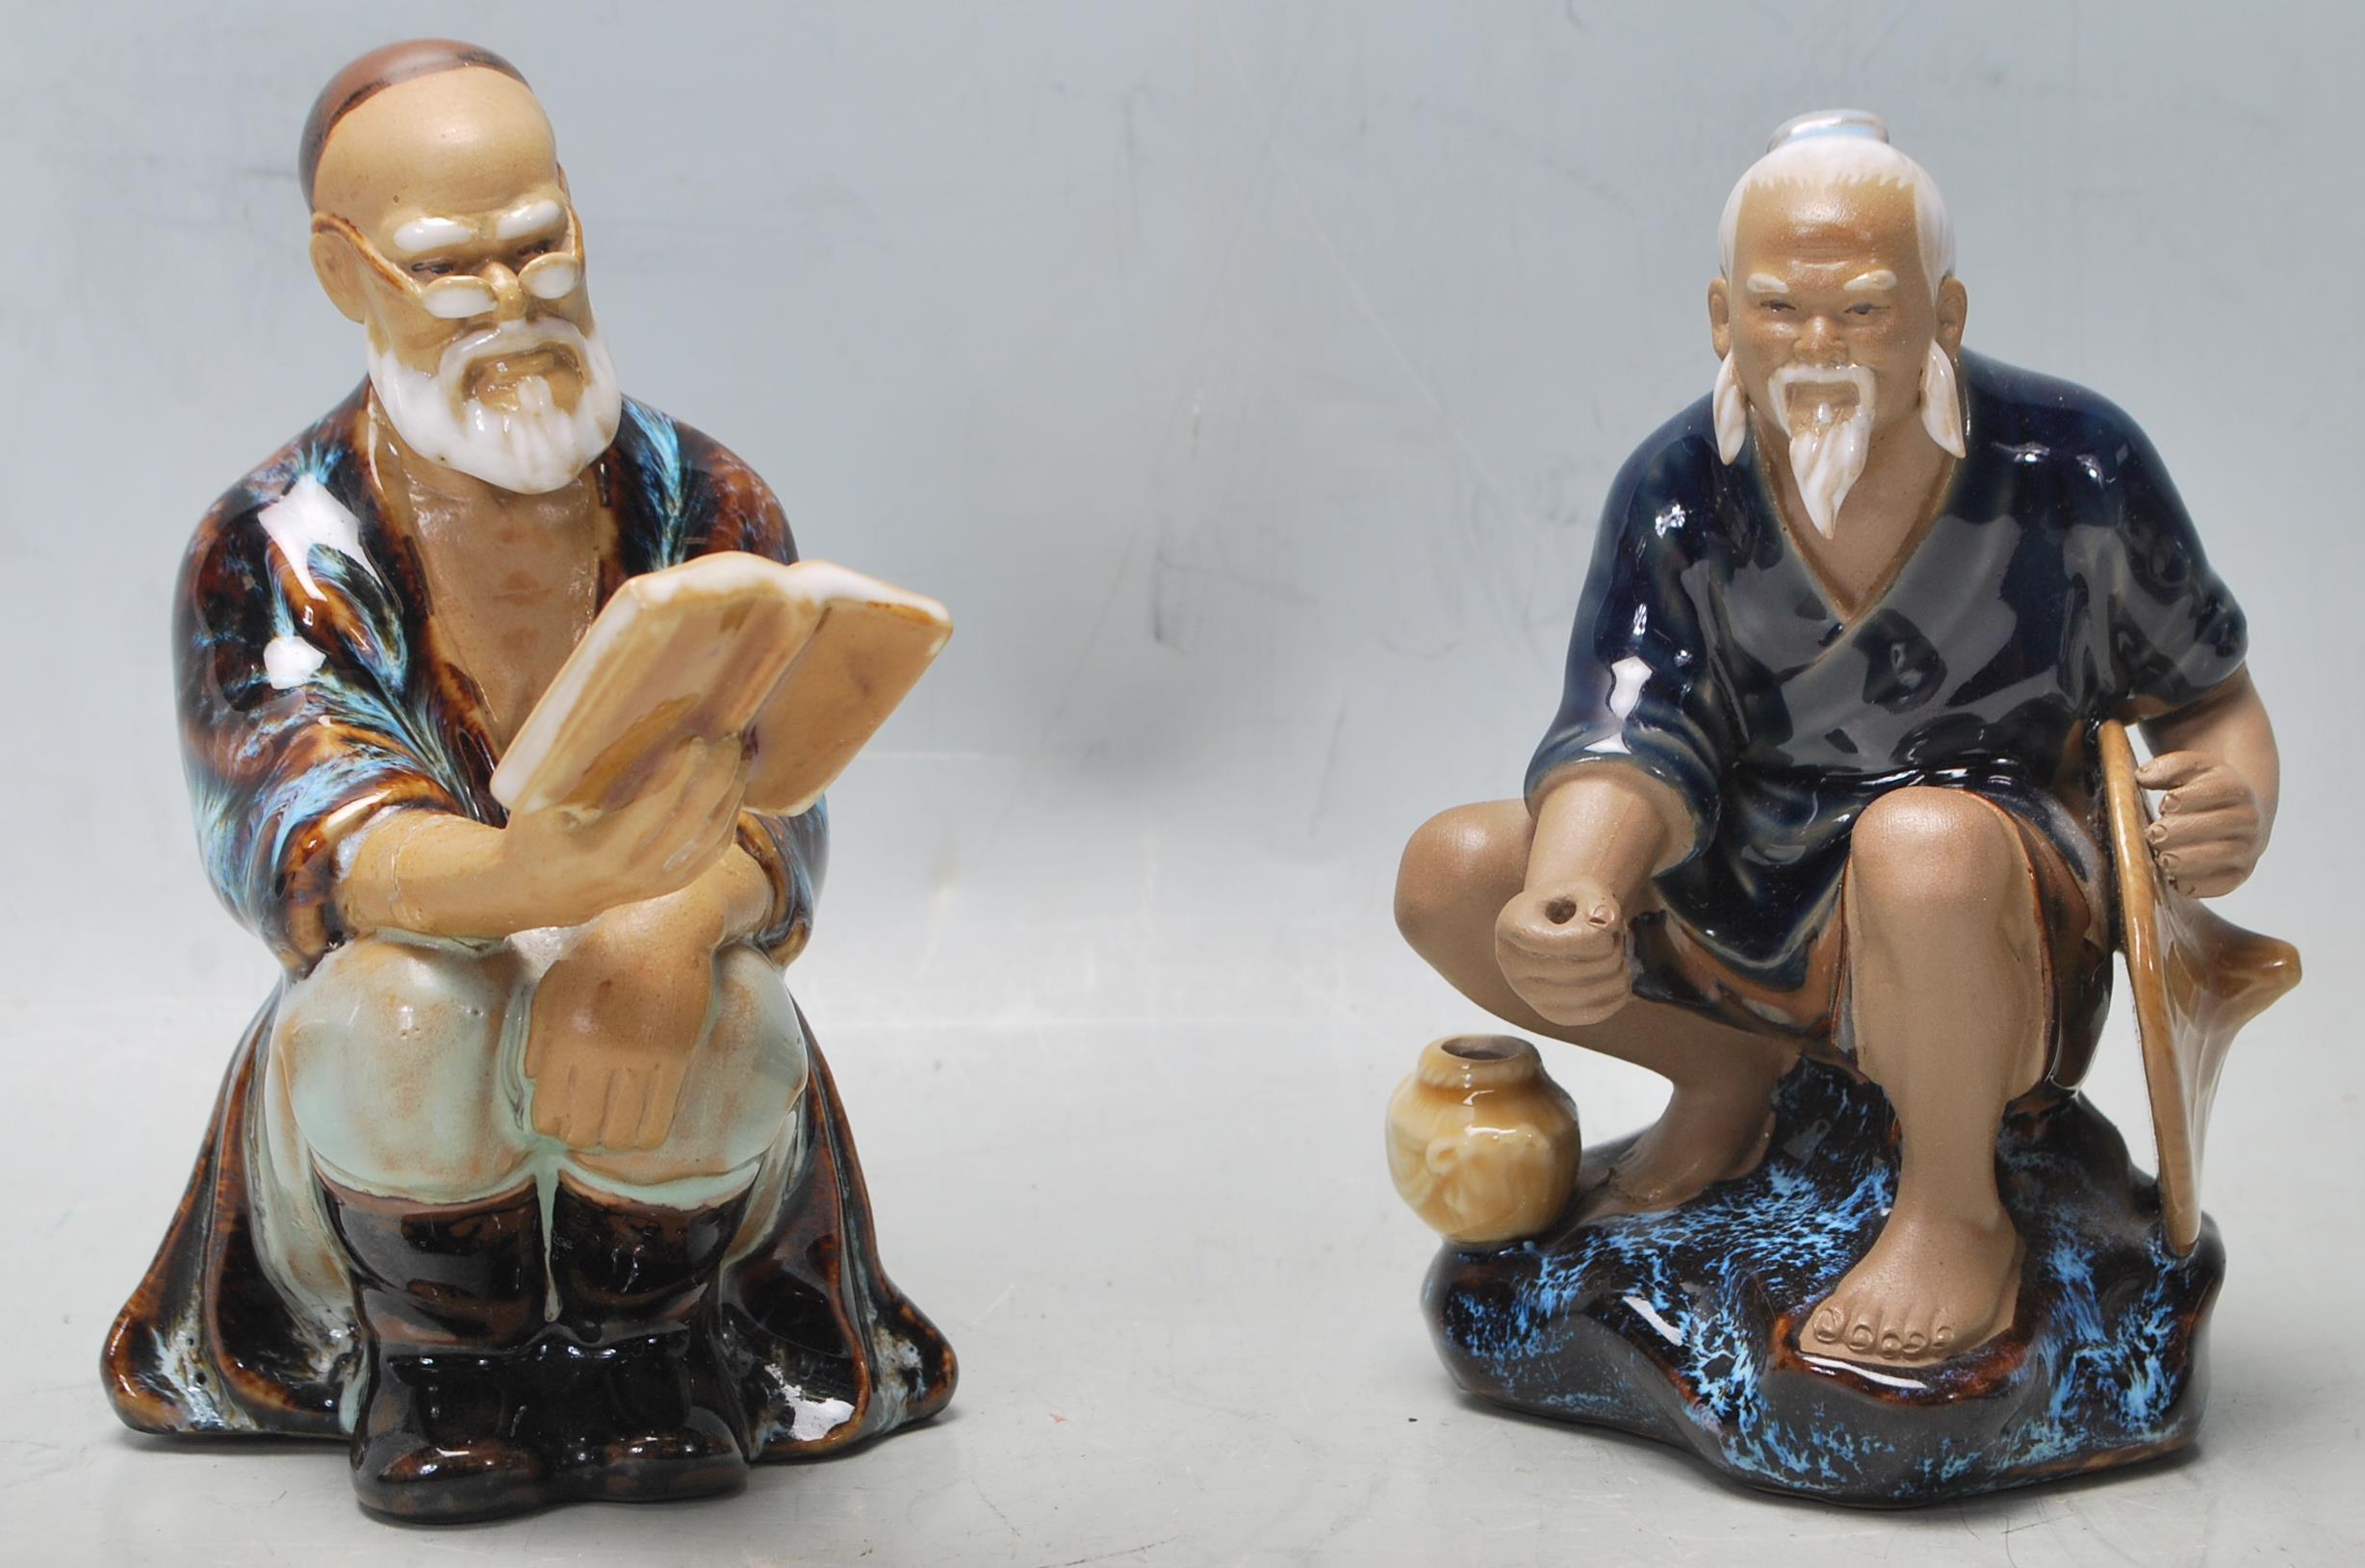 ANTIQUE STYLE CHINESE TERRACOTTA FIGURES